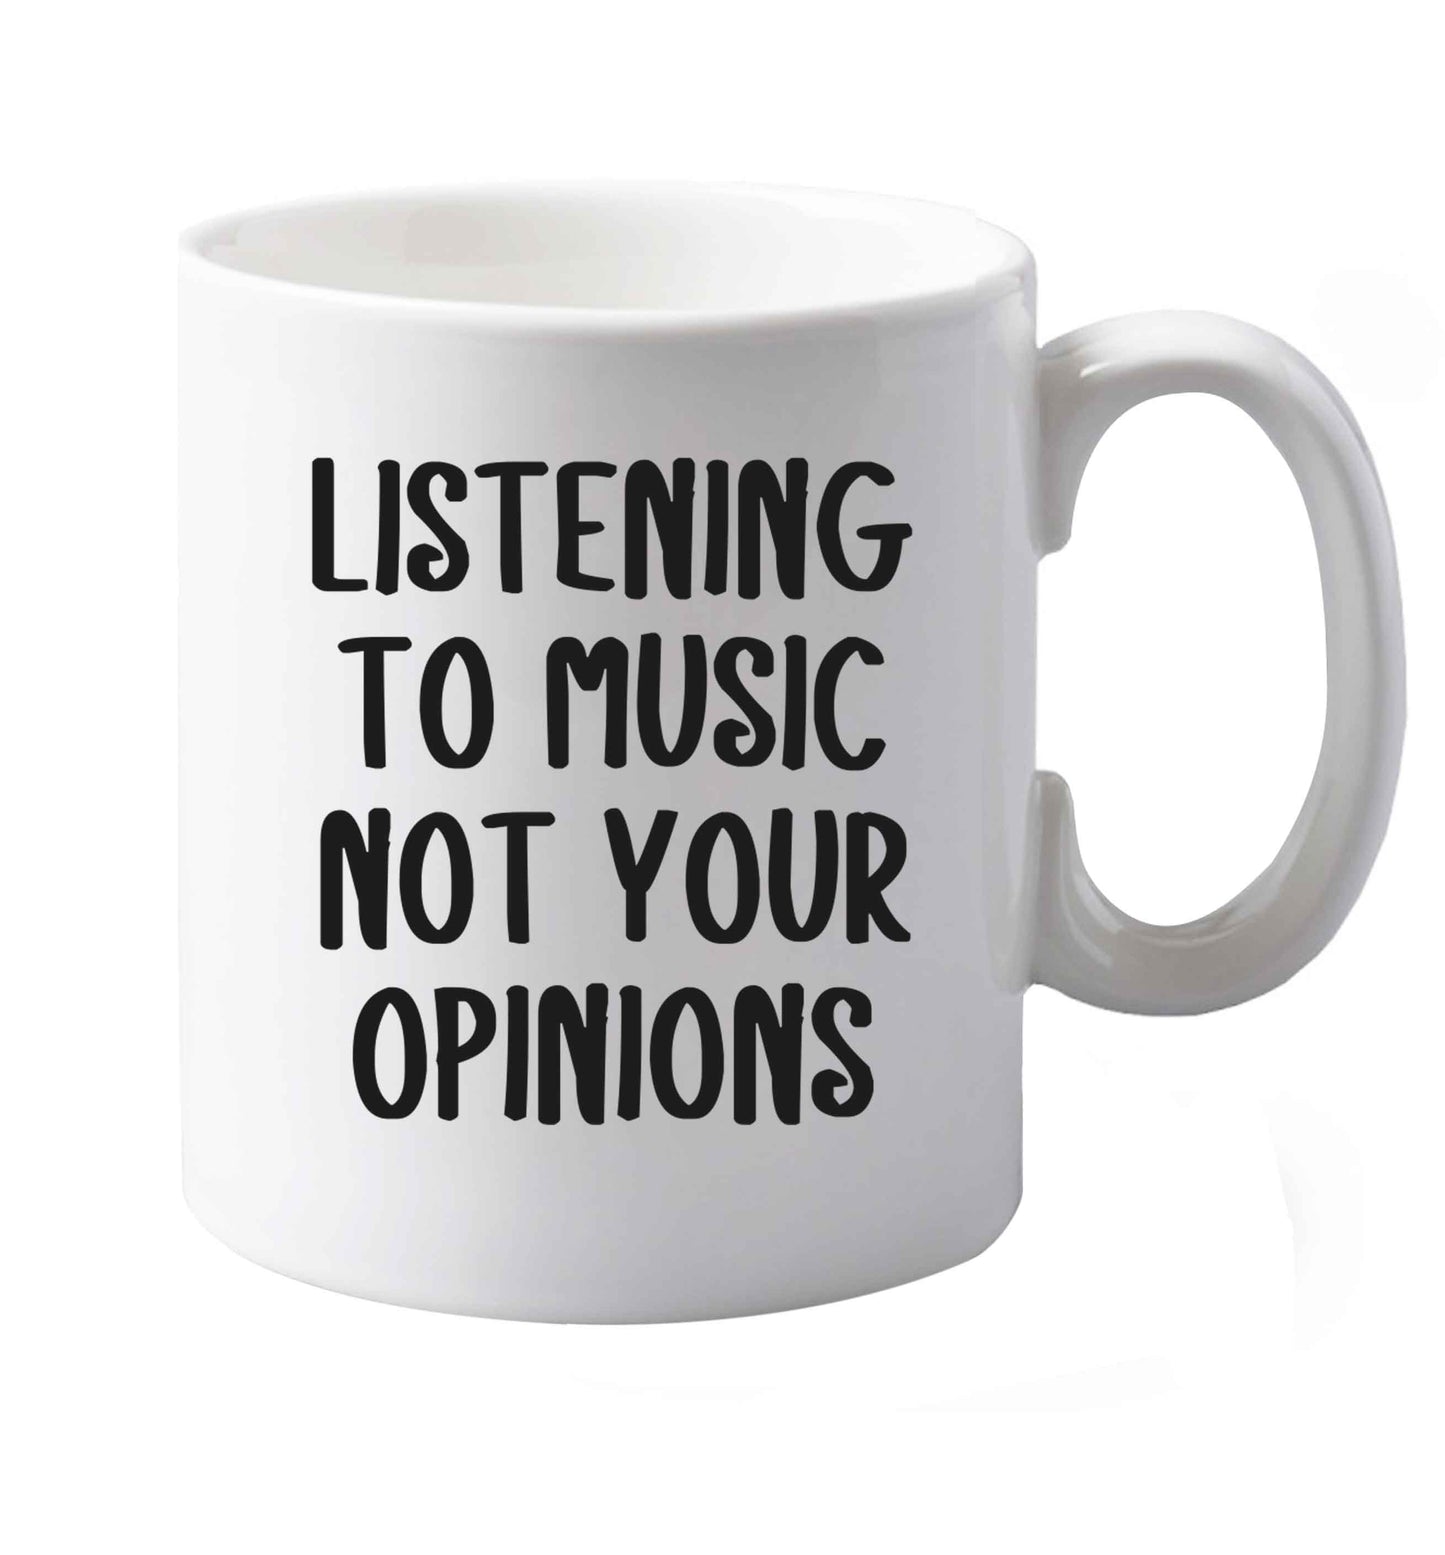 10 oz Listening to music not your opinions  ceramic mug both sides